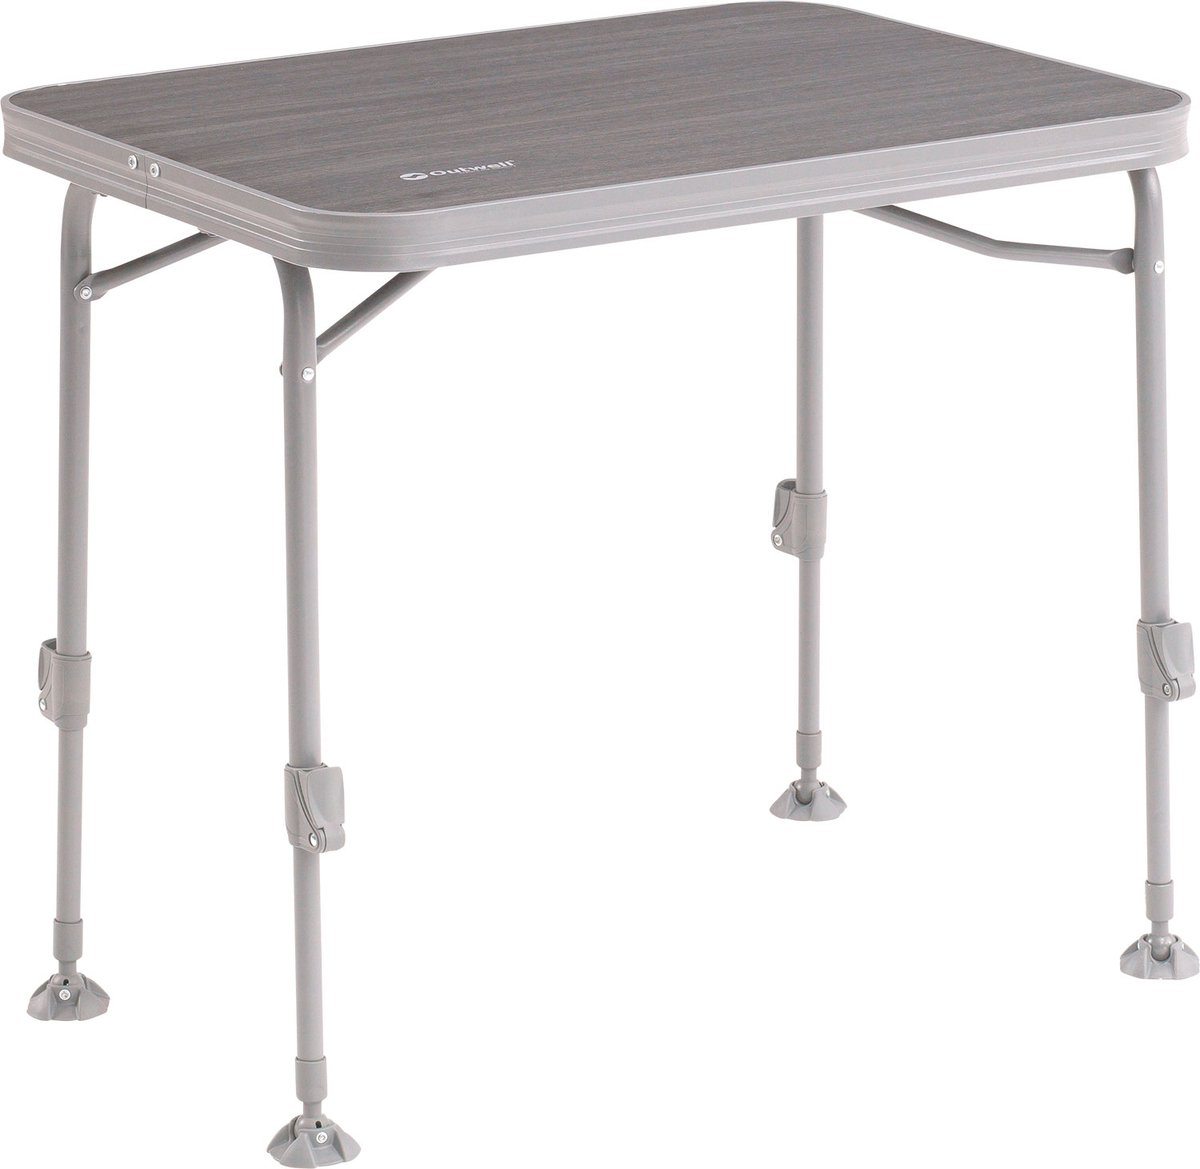 Outwell Coledale S Opvouwbare Tafel 80 x 60 cm